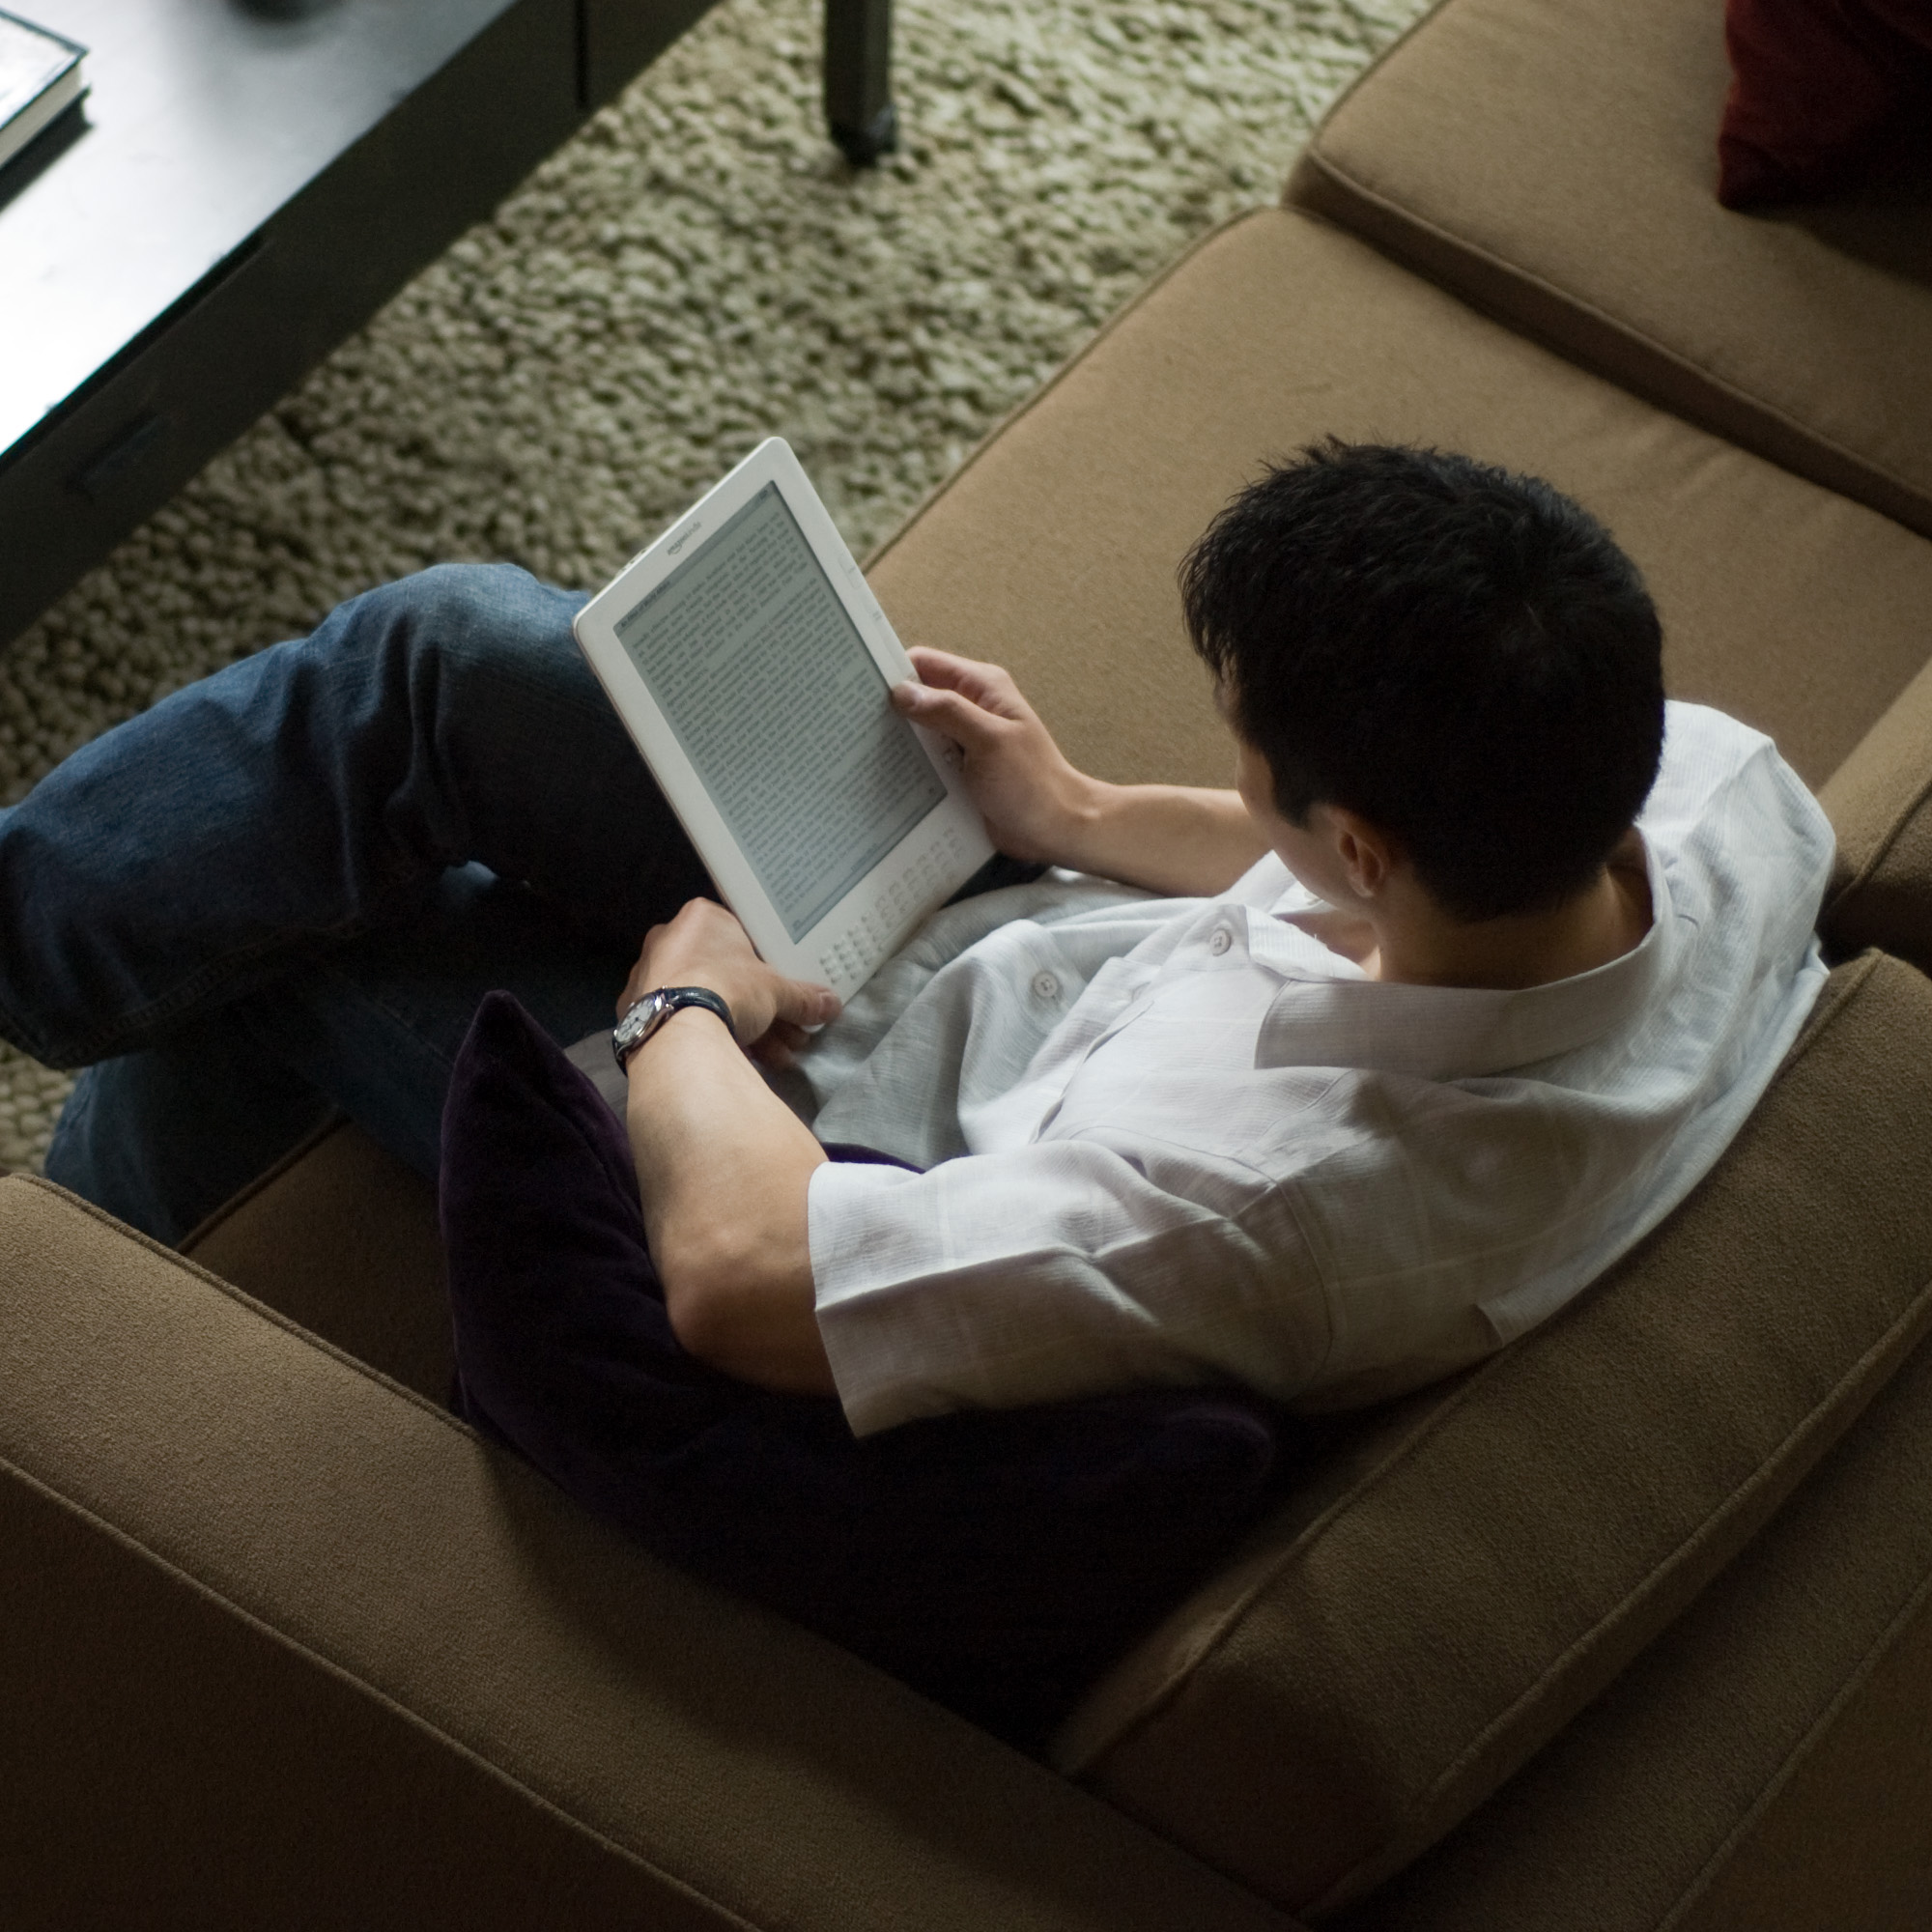 Man sitting on a couch reading a kindle device